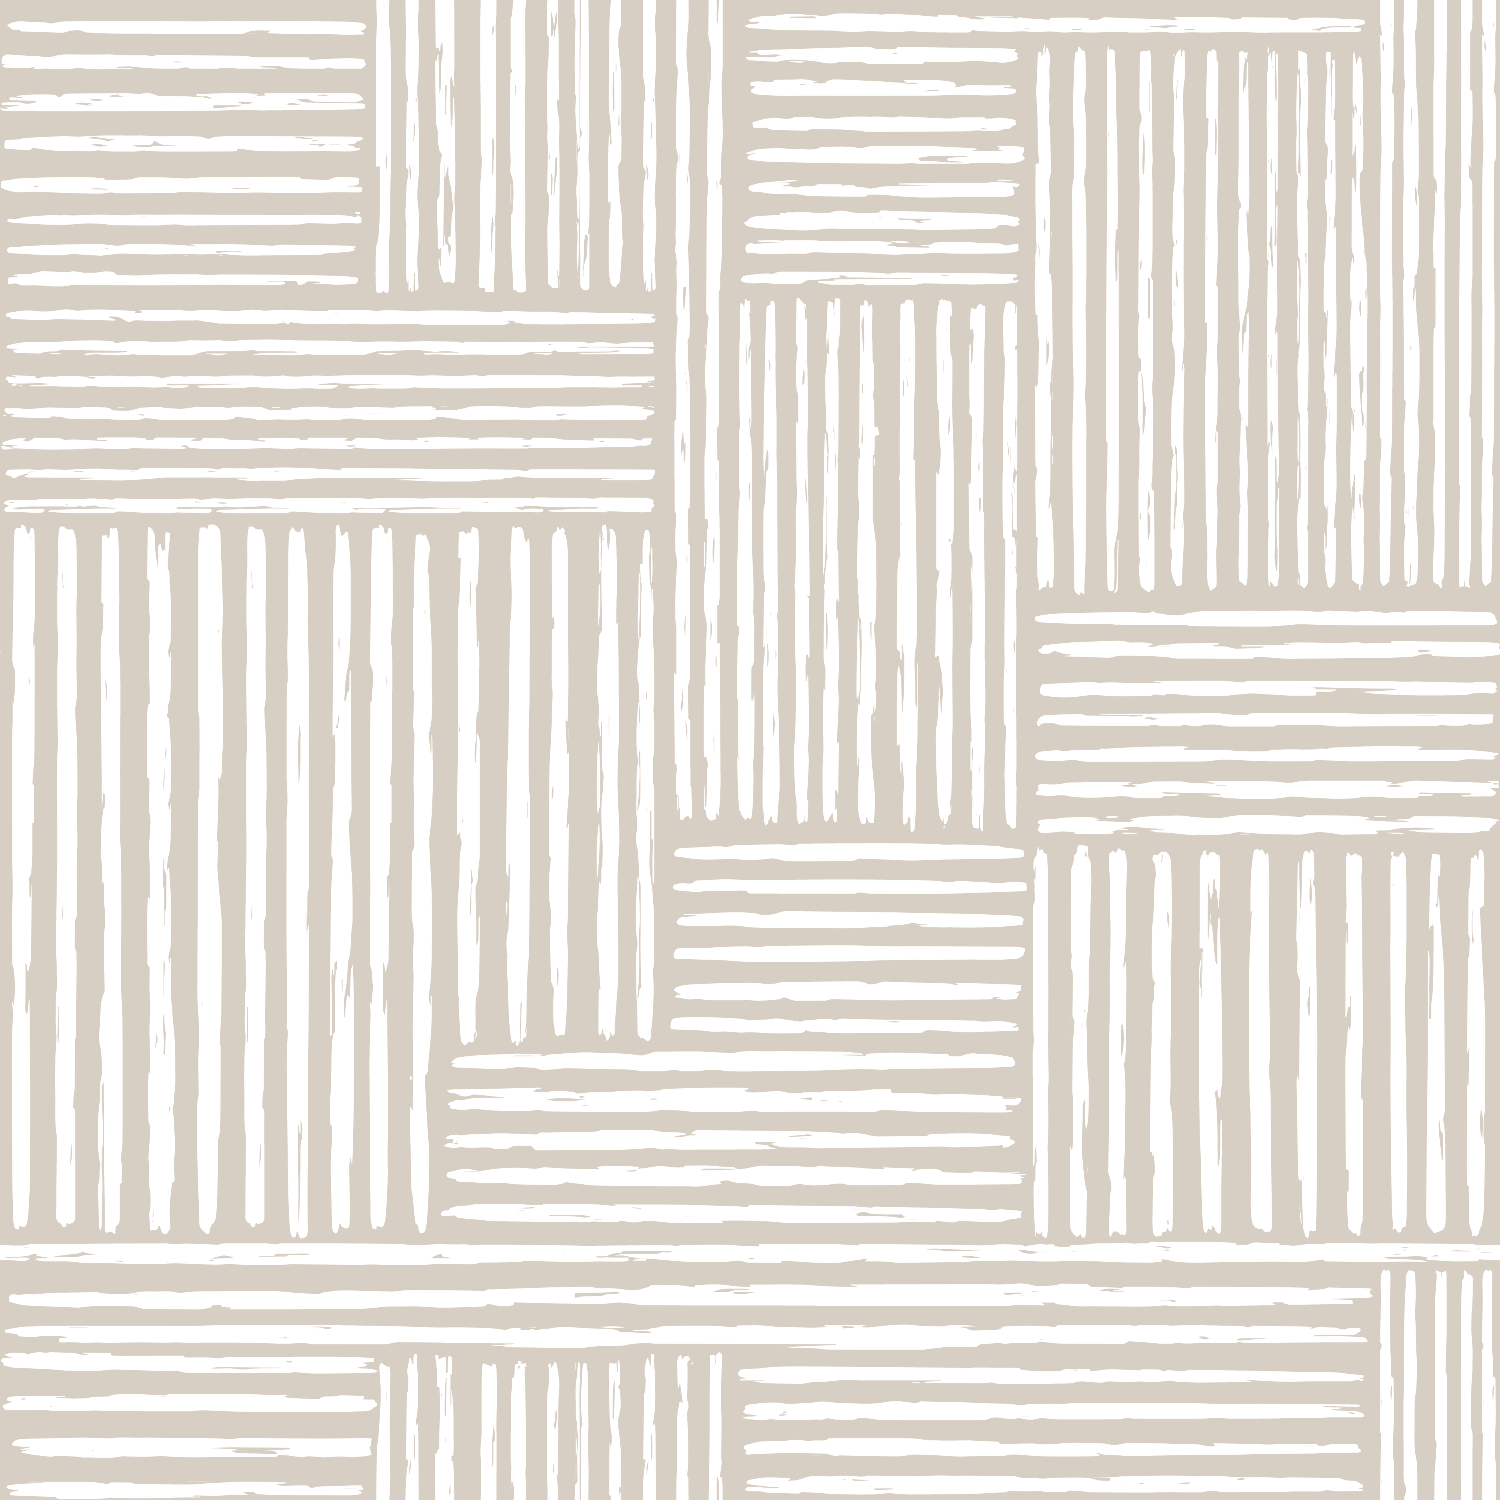 A close-up view of a section of Neutral Geometric Wallpaper, featuring a pattern of thick and thin beige lines creating an array of rectangles and squares on a light background.